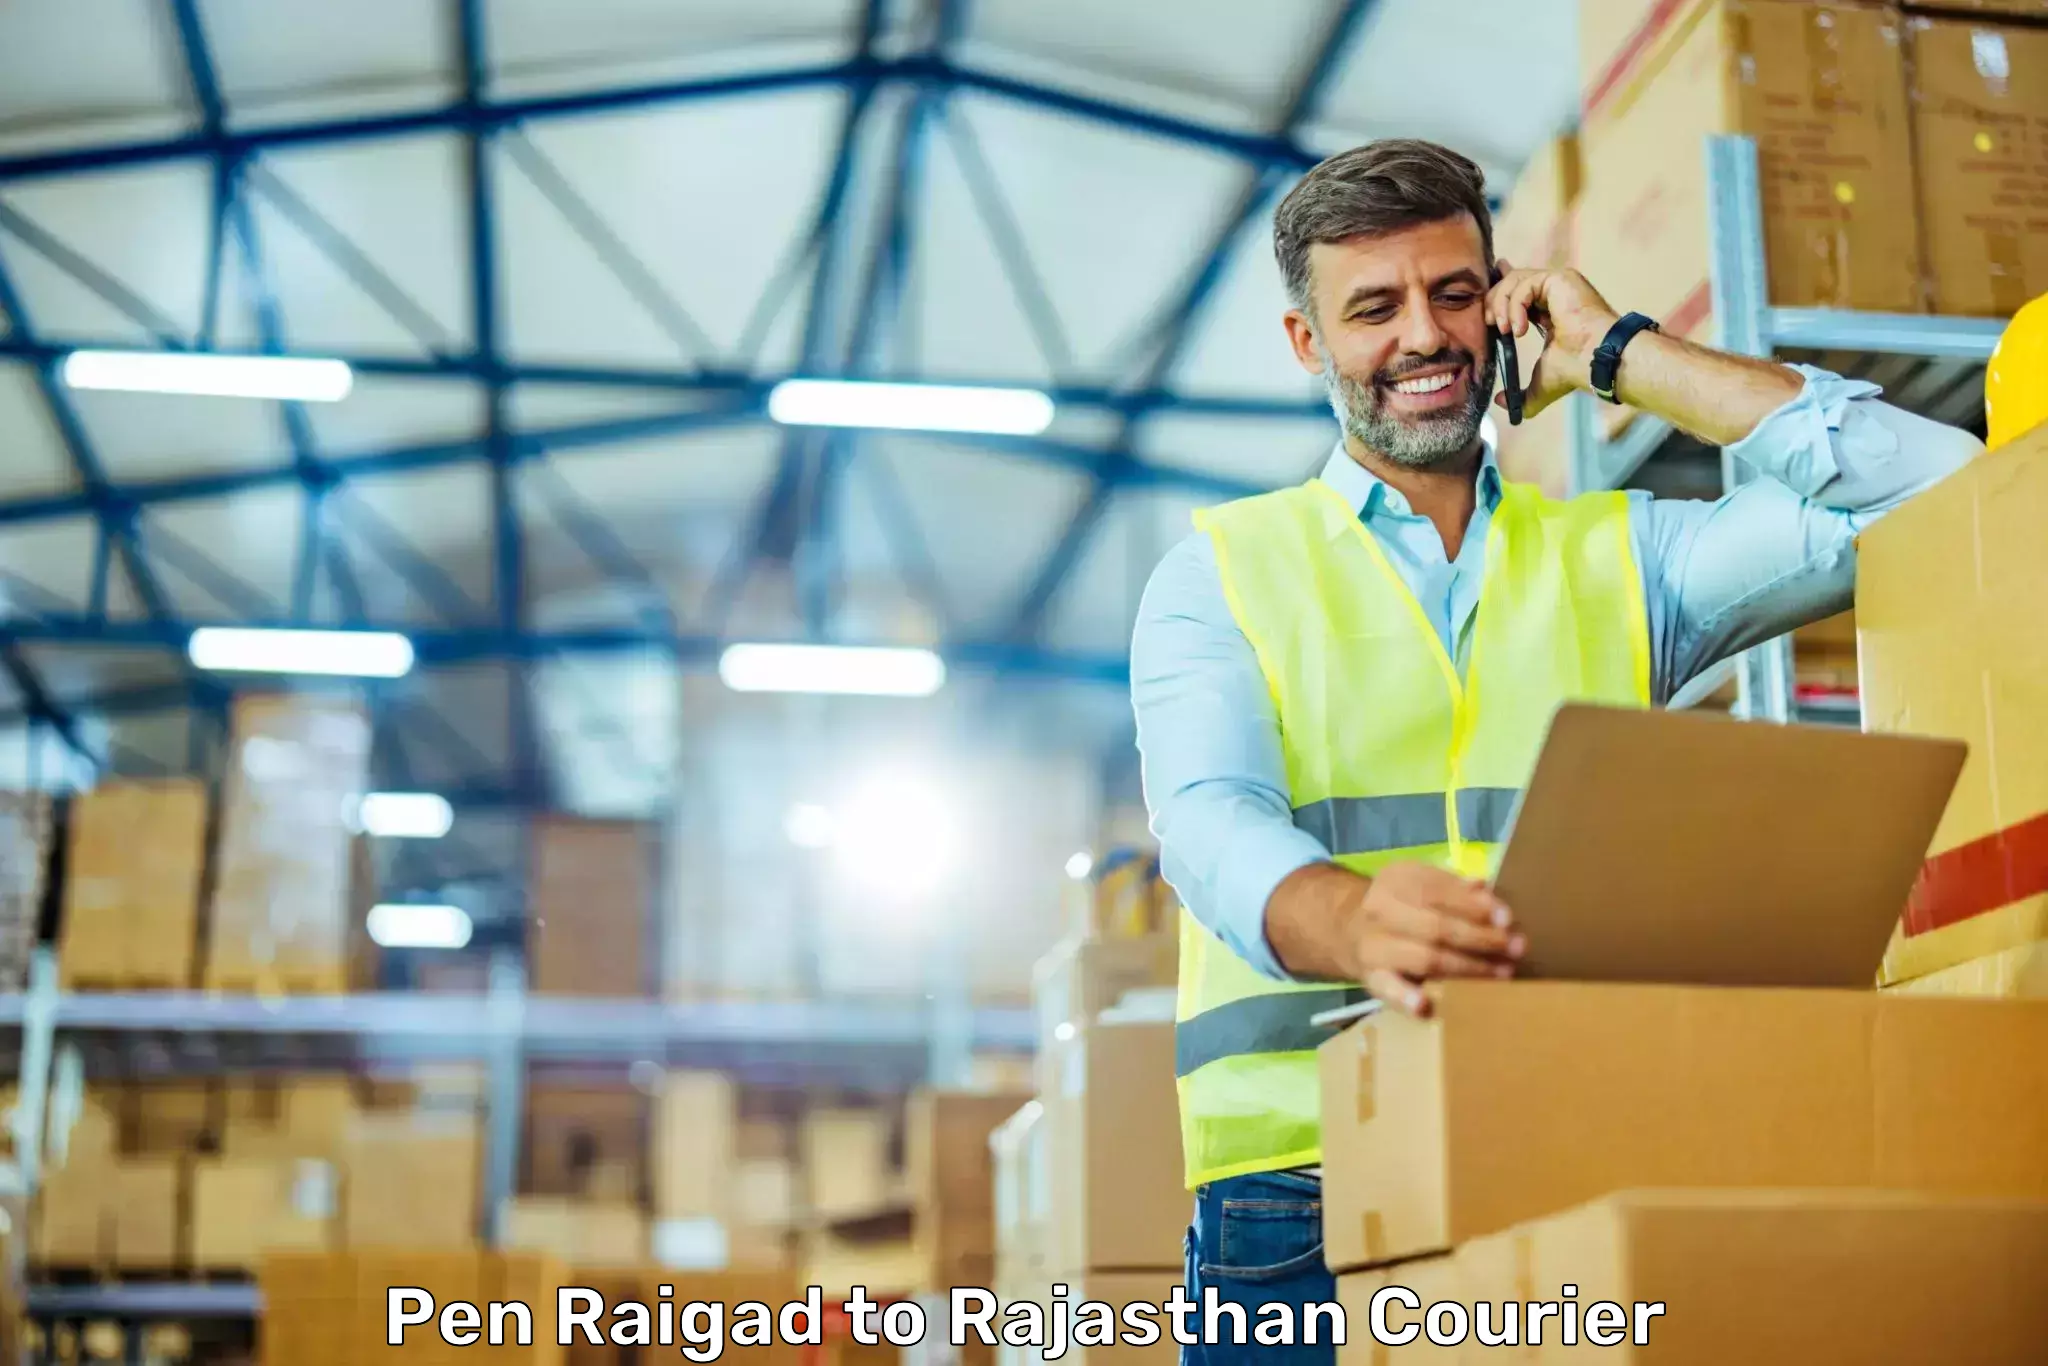 24/7 courier service Pen Raigad to Rajasthan